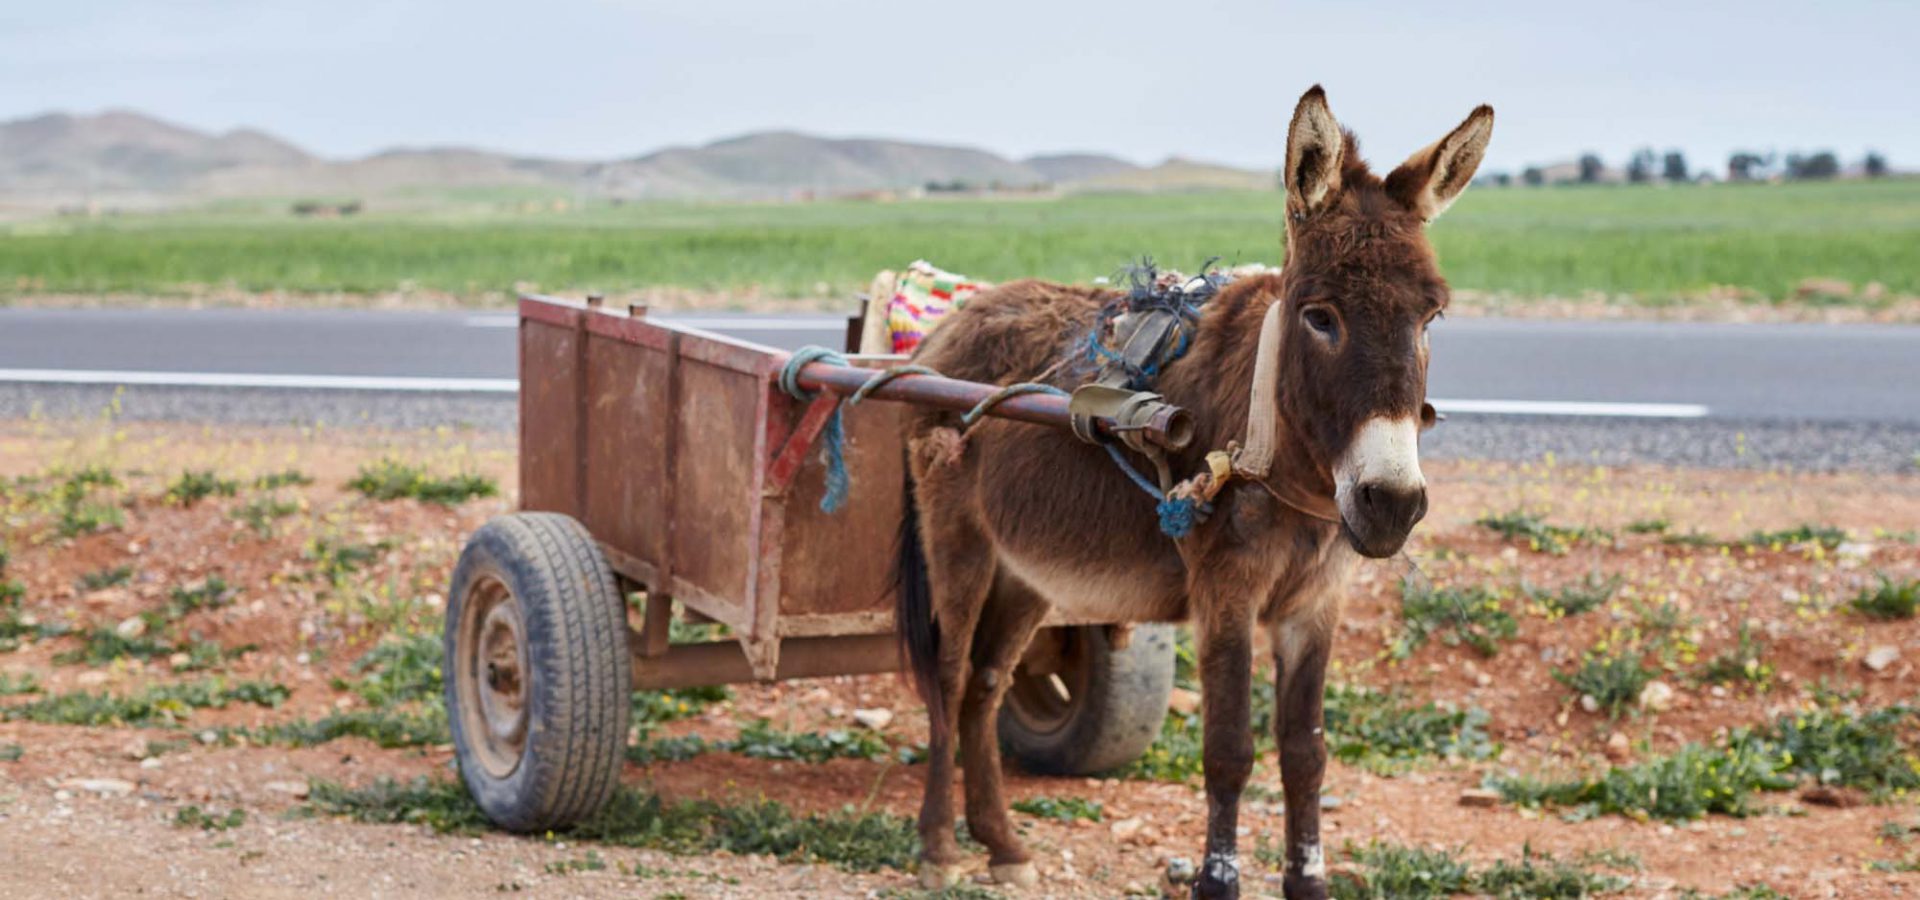 Brown donkey with cart on the side of the road